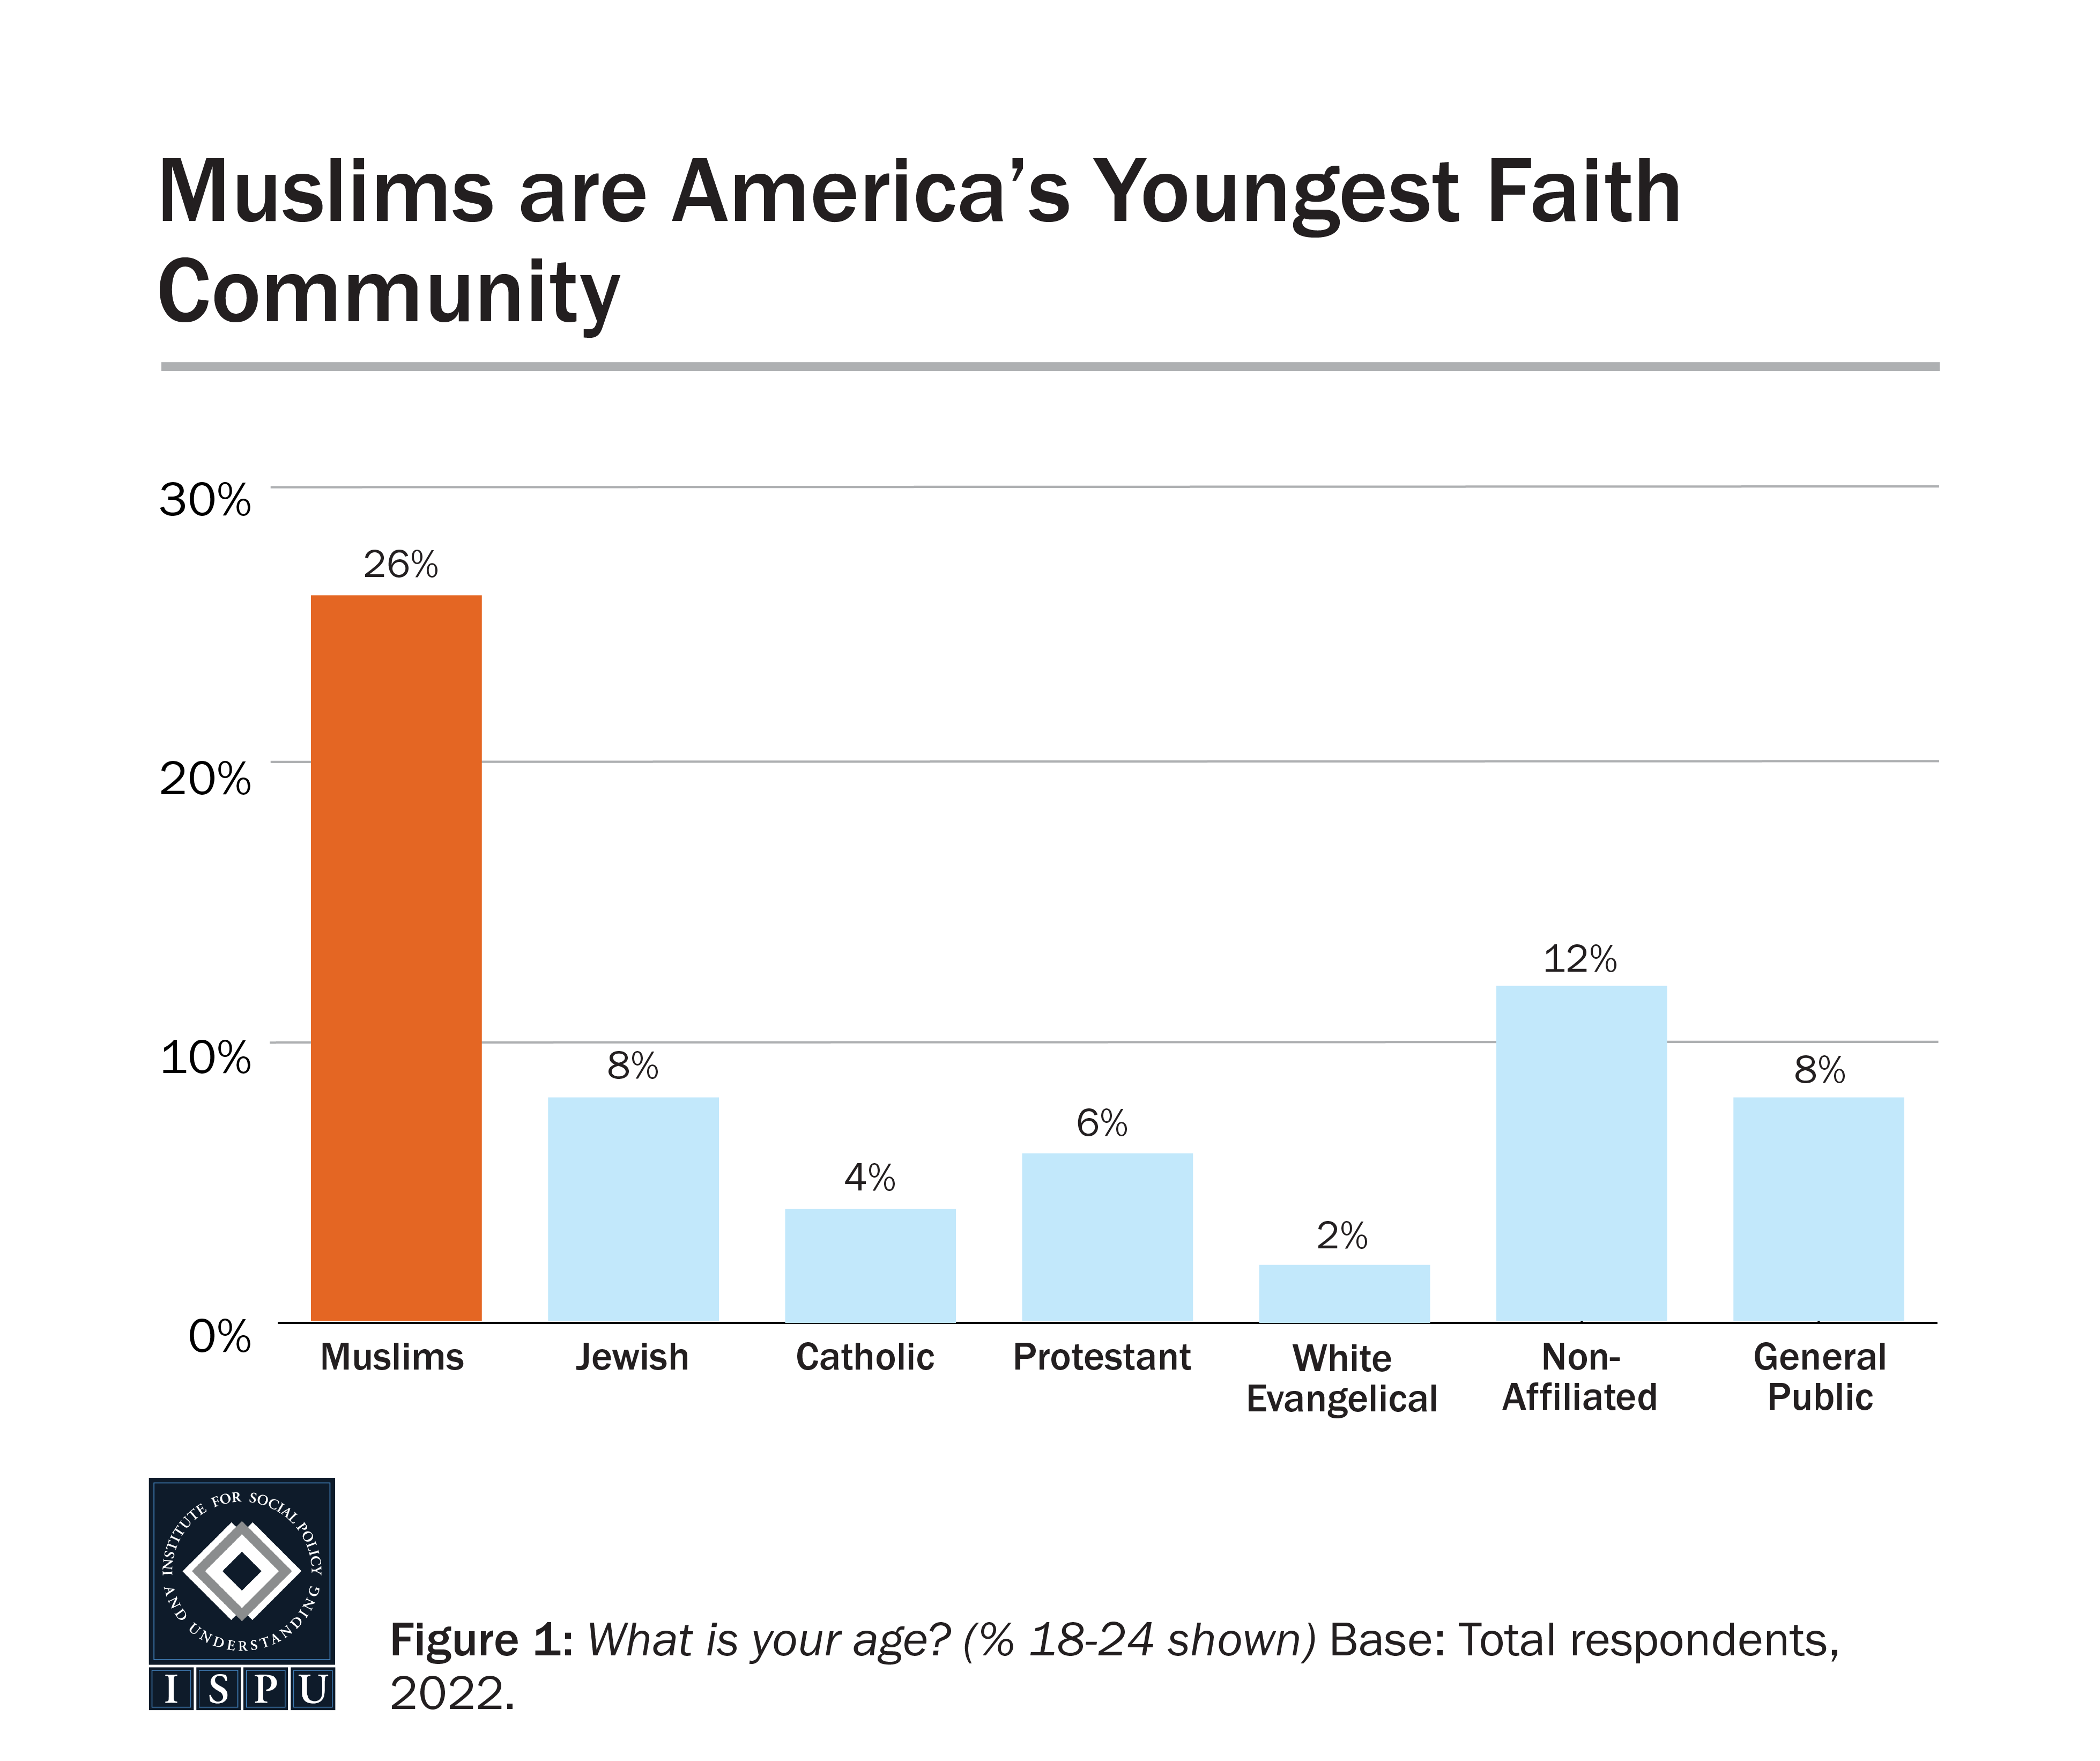 A bar graph showing that a higher proportion of American Muslims, compared to all other groups, are aged 18-24 years old